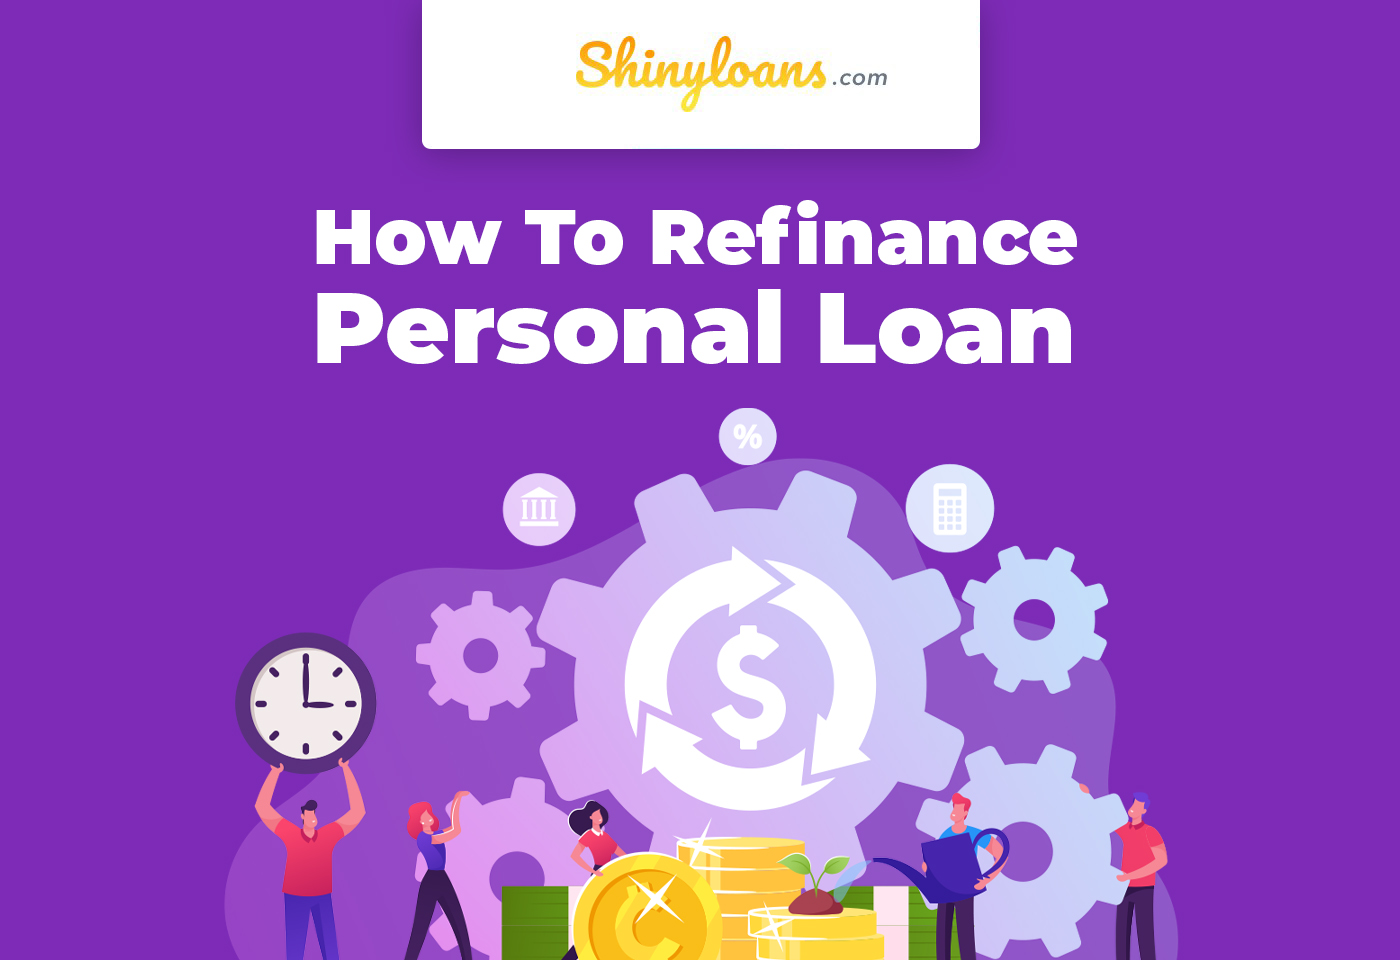 How To Refinance Personal Loan